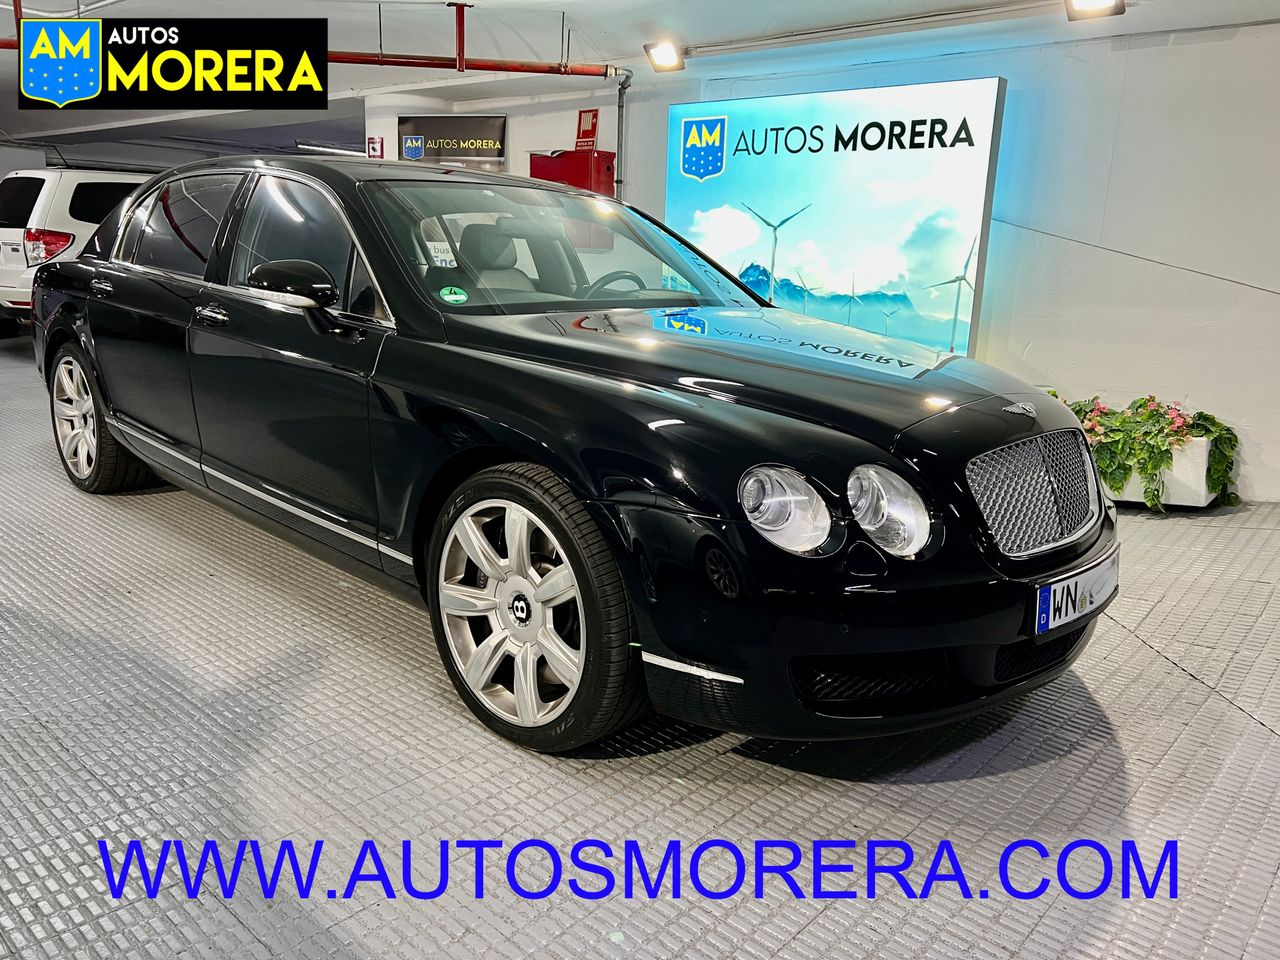 Bentley Continental Flying Spur 6.0 V12. Matricula alemana. Impecable.   - Foto 1